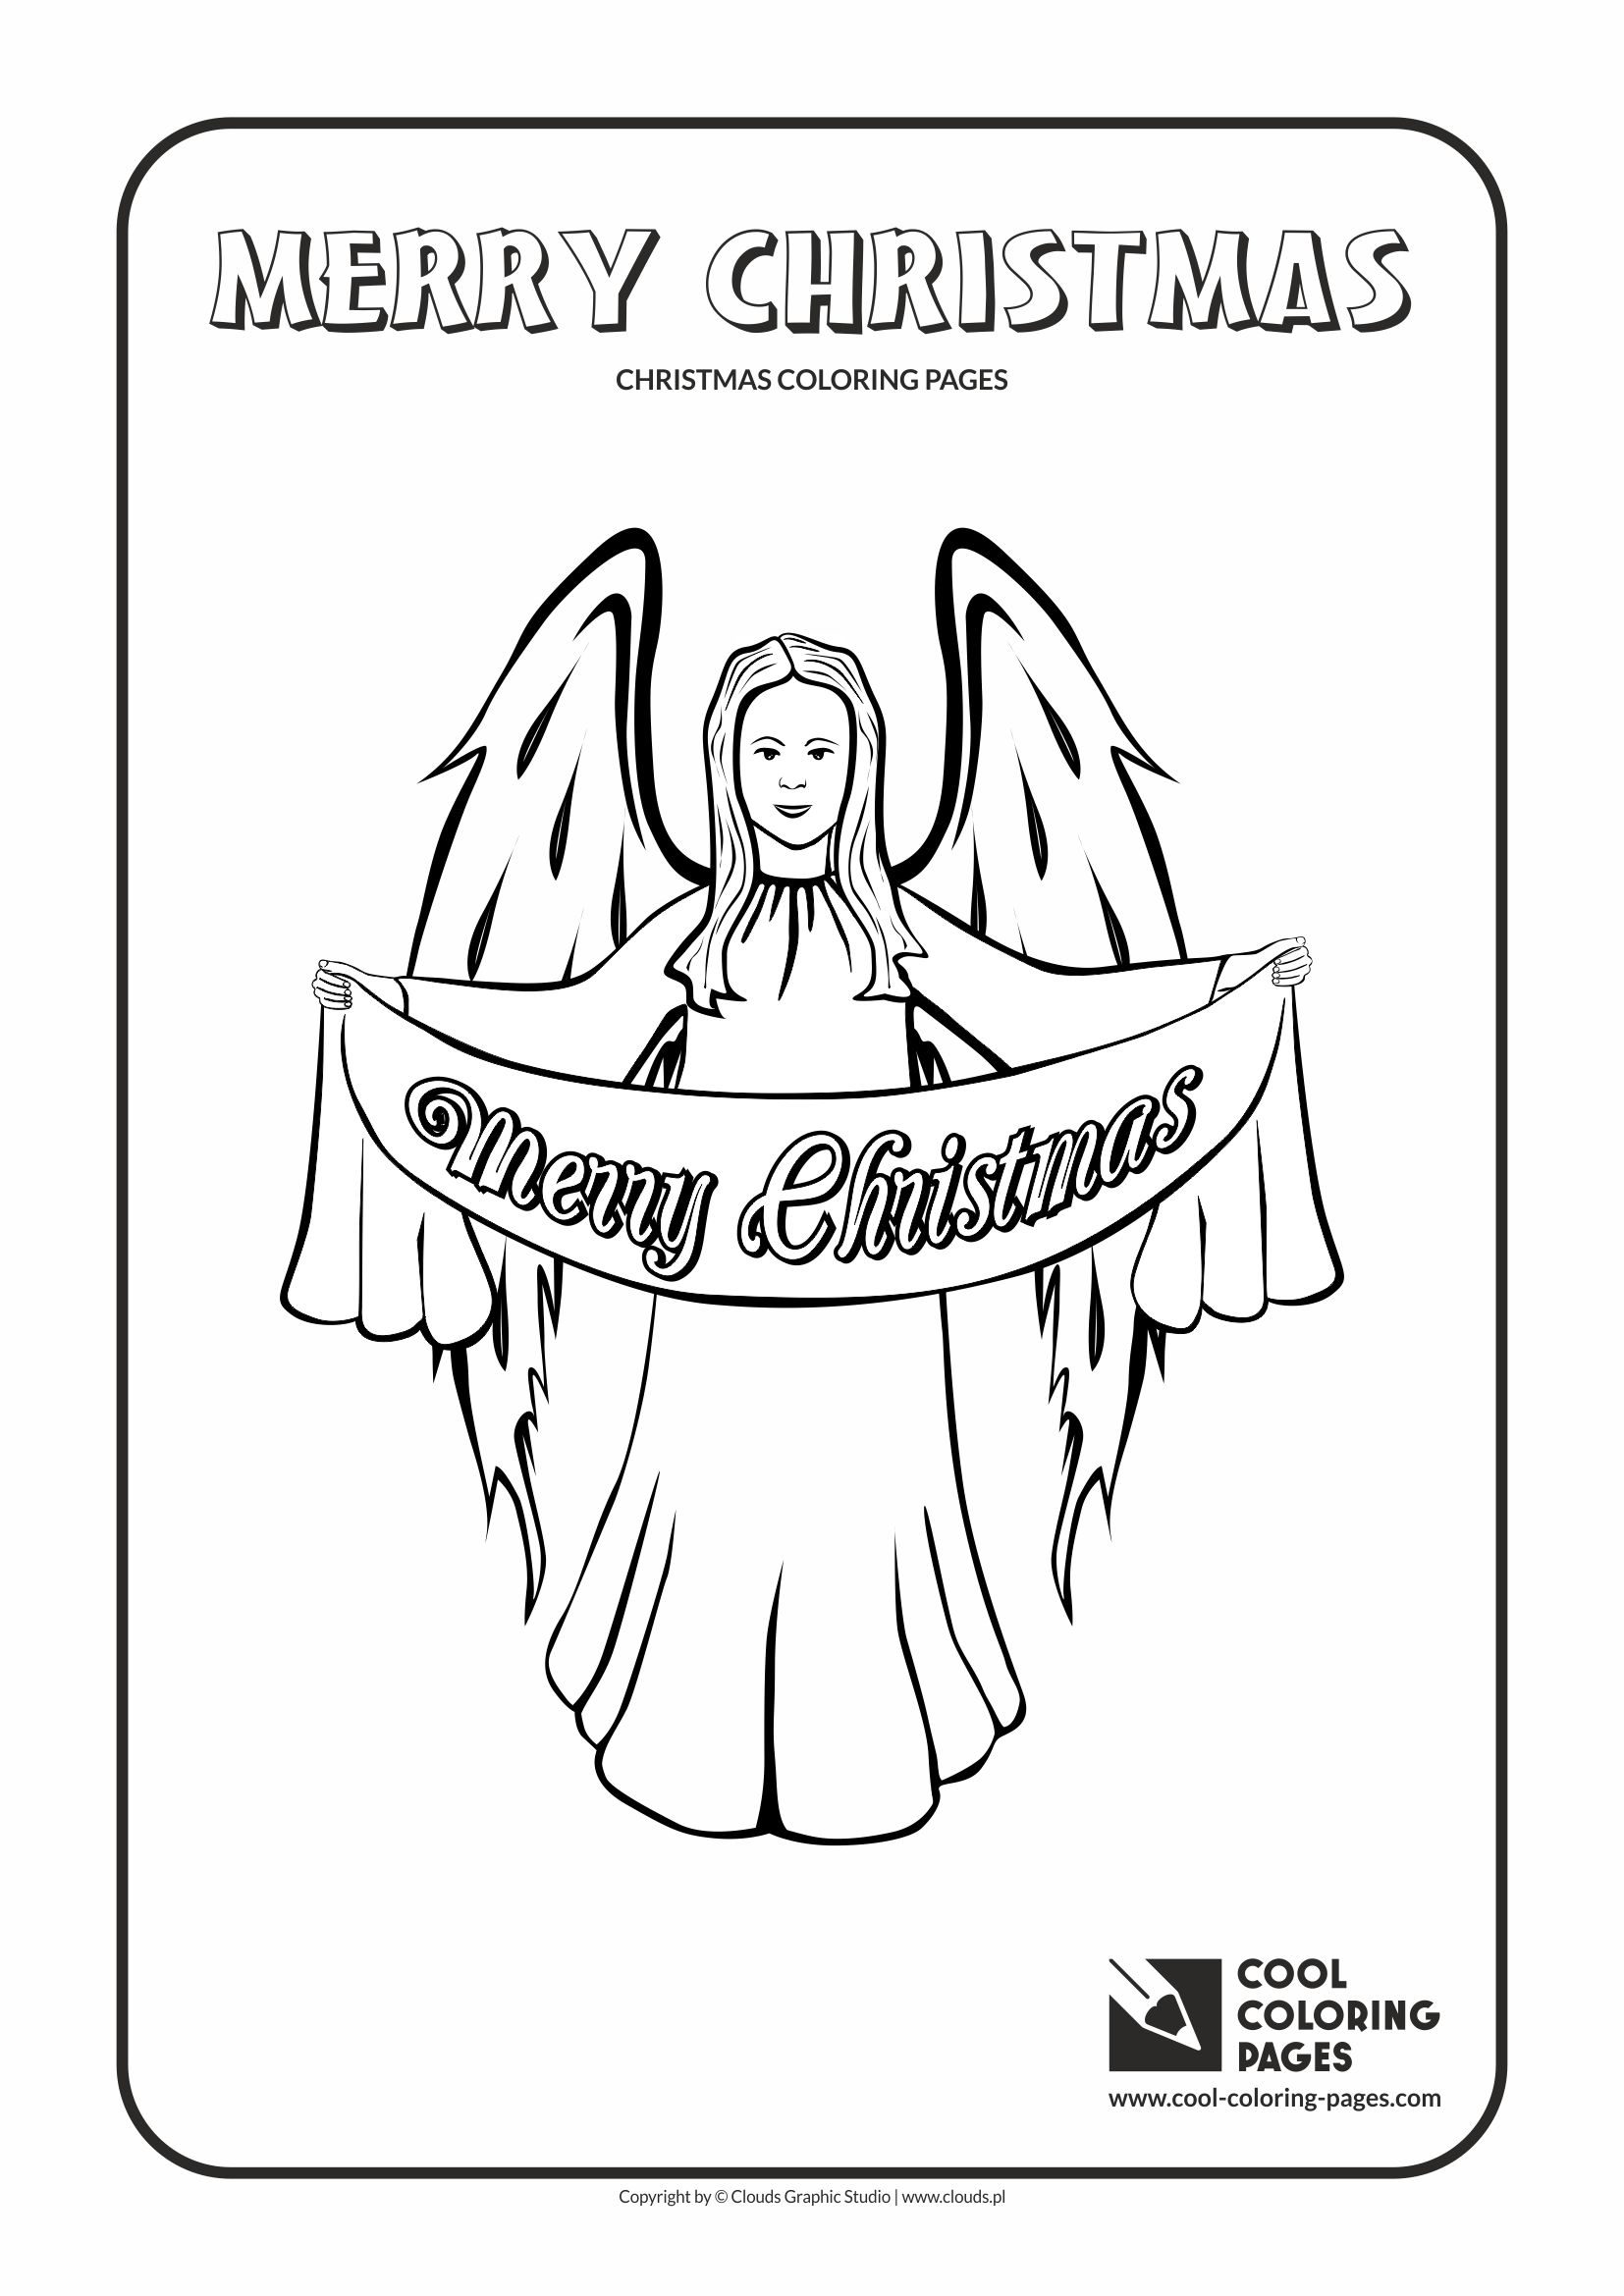 Cool Coloring Pages - Holidays / Christmas angel / Coloring page with Christmas angel